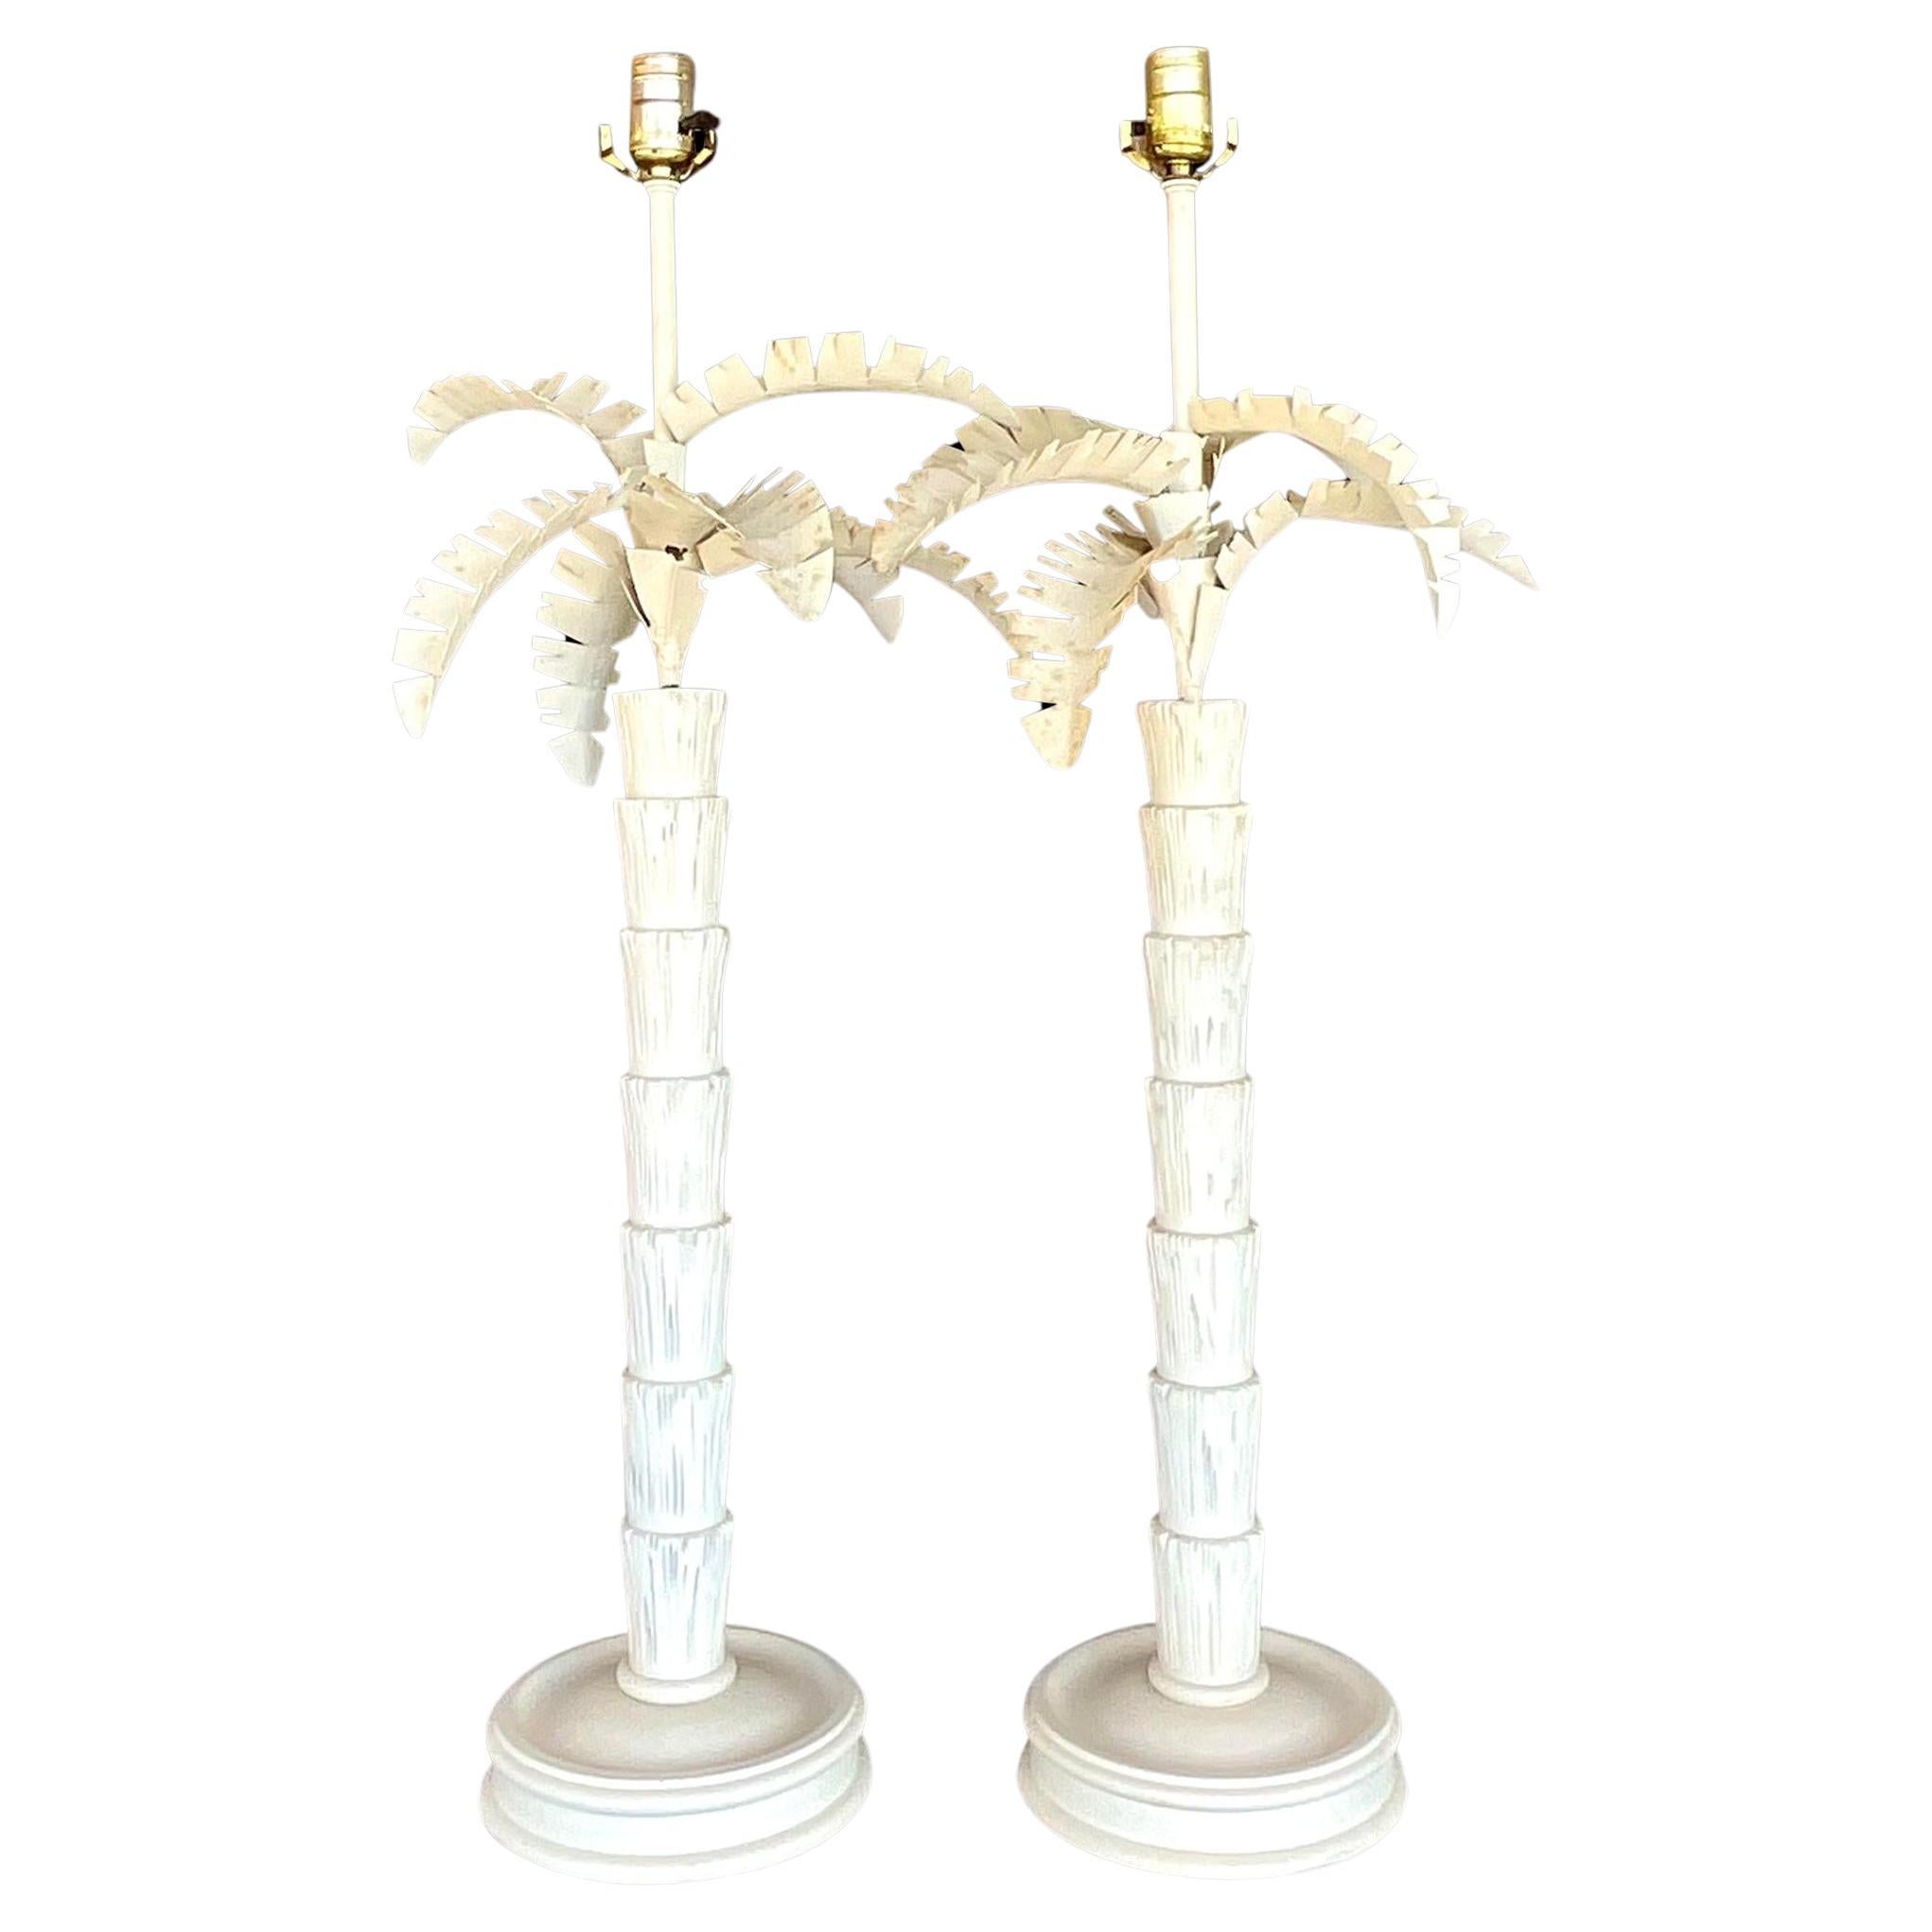 Vintage Costal Punch Cut Metal Palm Tree Lamps - a Pair For Sale